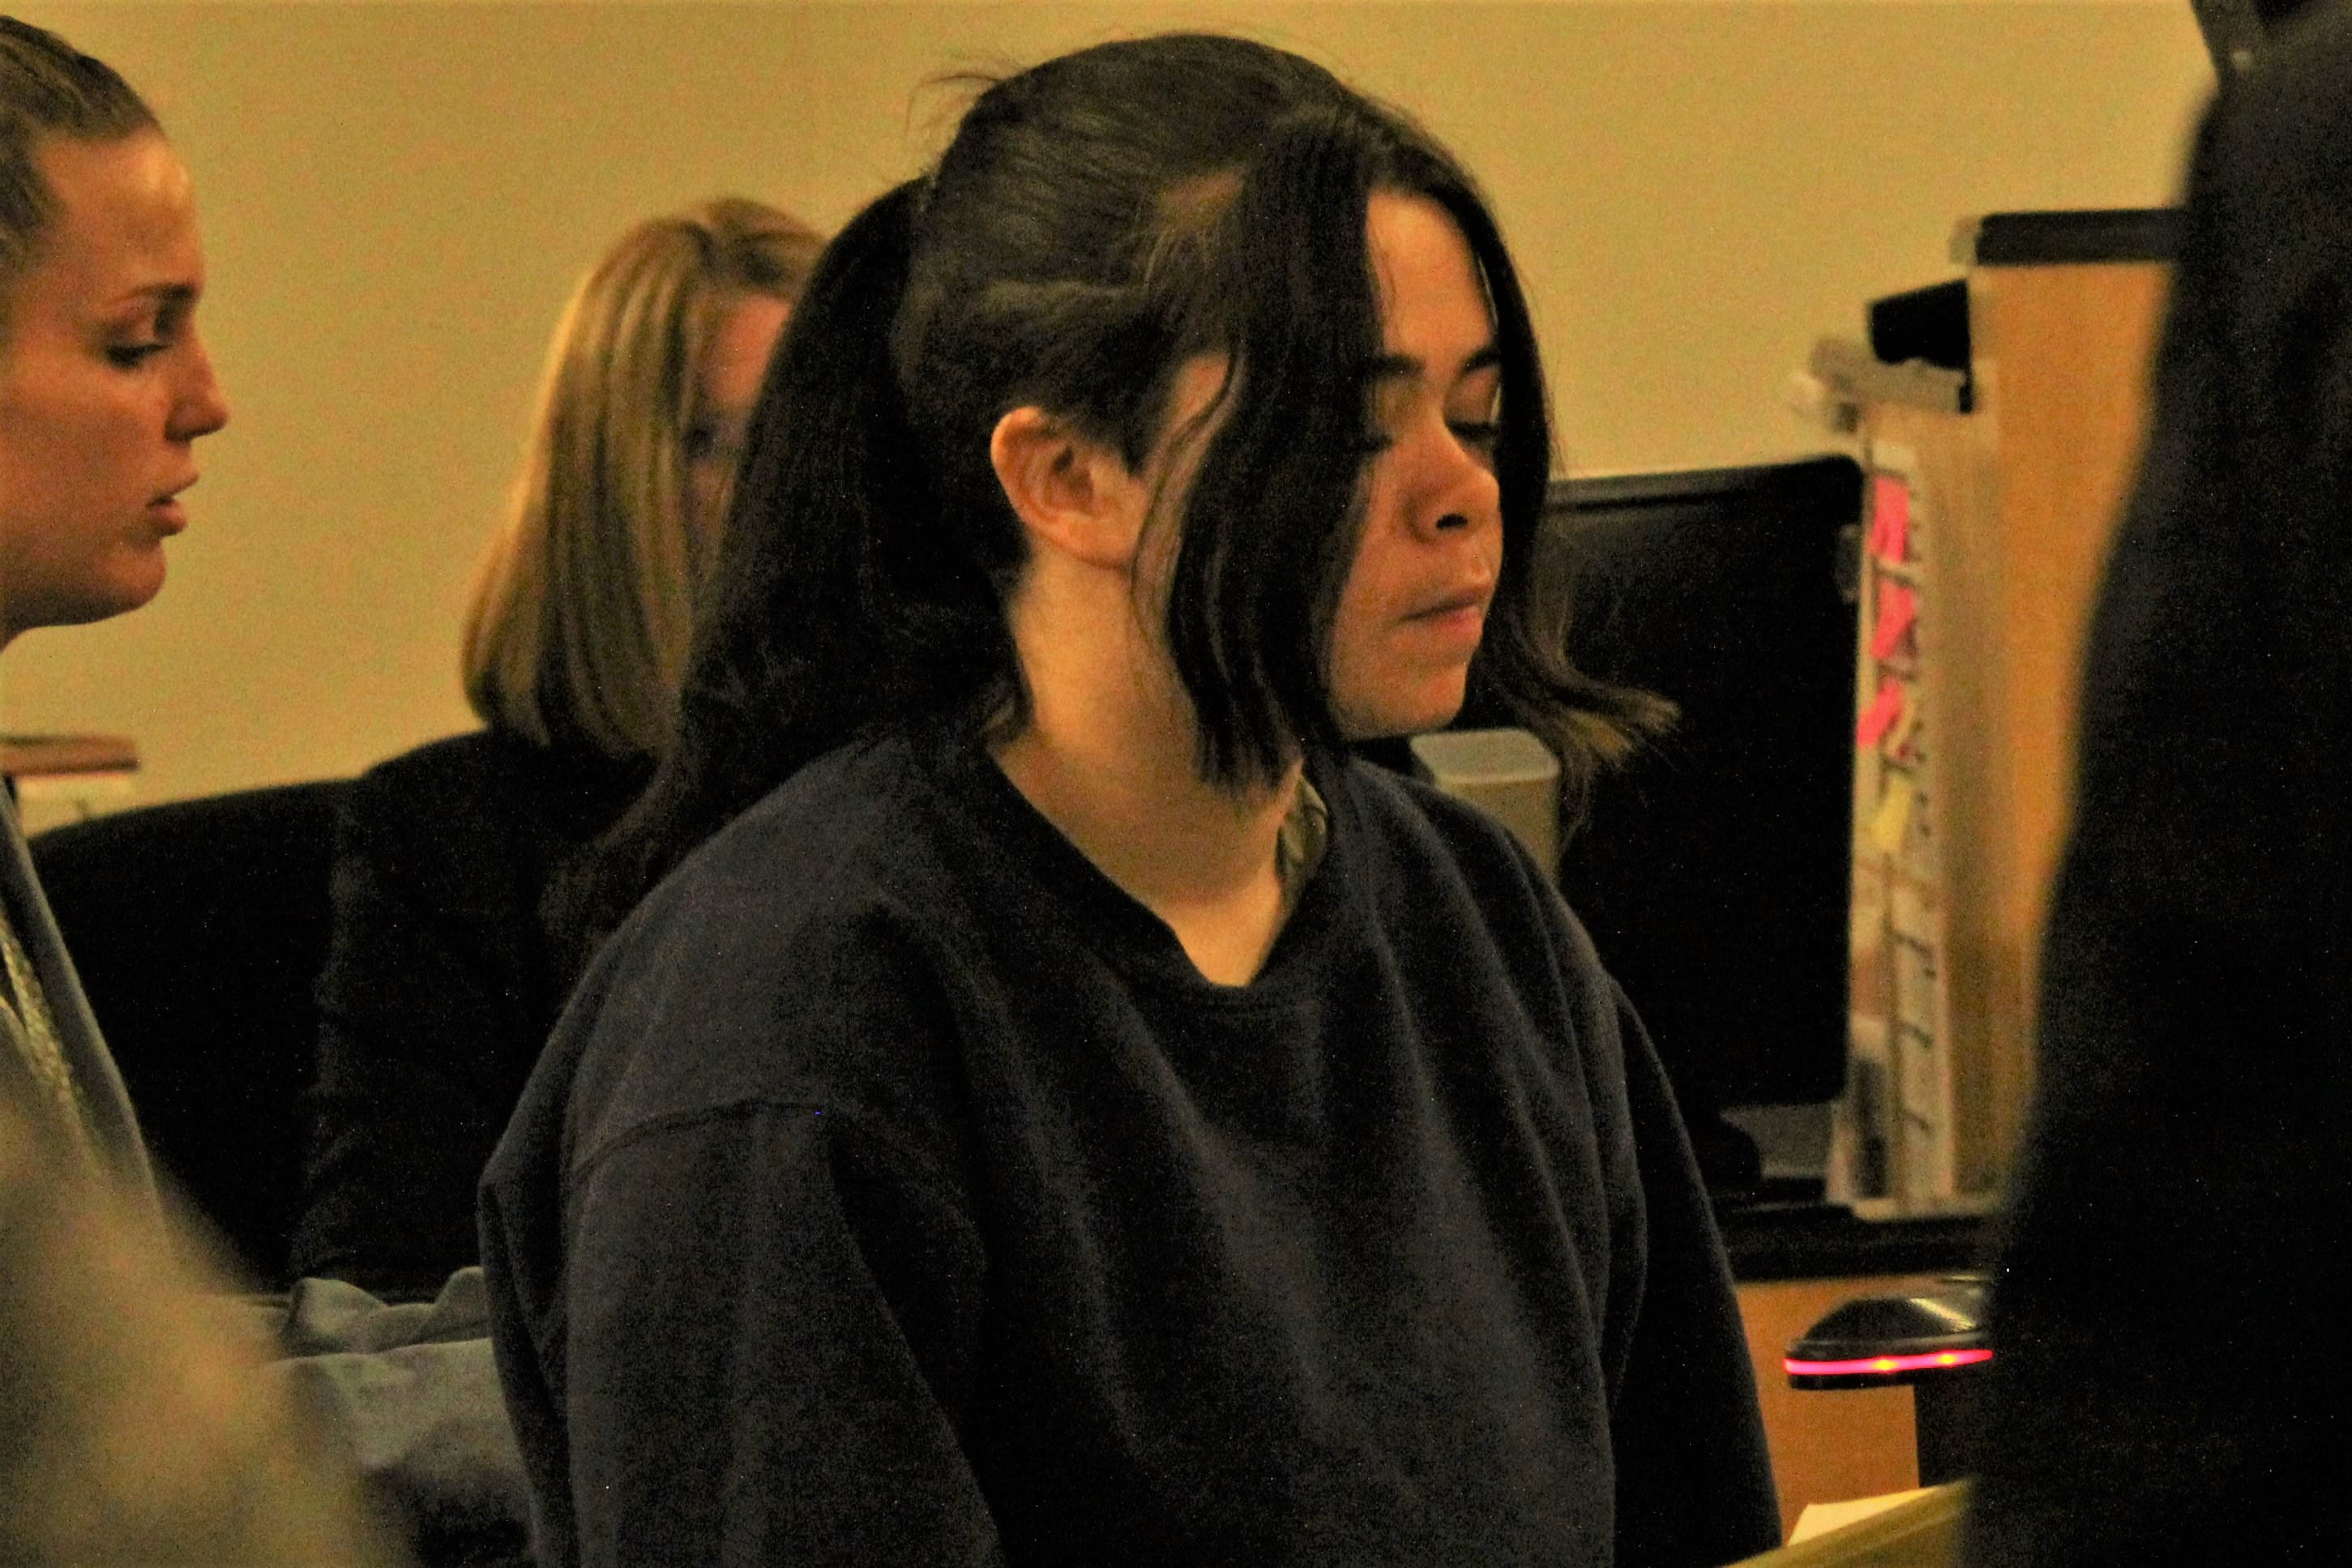 Sophia L. Utton, 16, appears in Clark County Superior Court on Monday to face a second-degree attempted murder charge, stemming from a home invasion in Hazel Dell in mid-December.